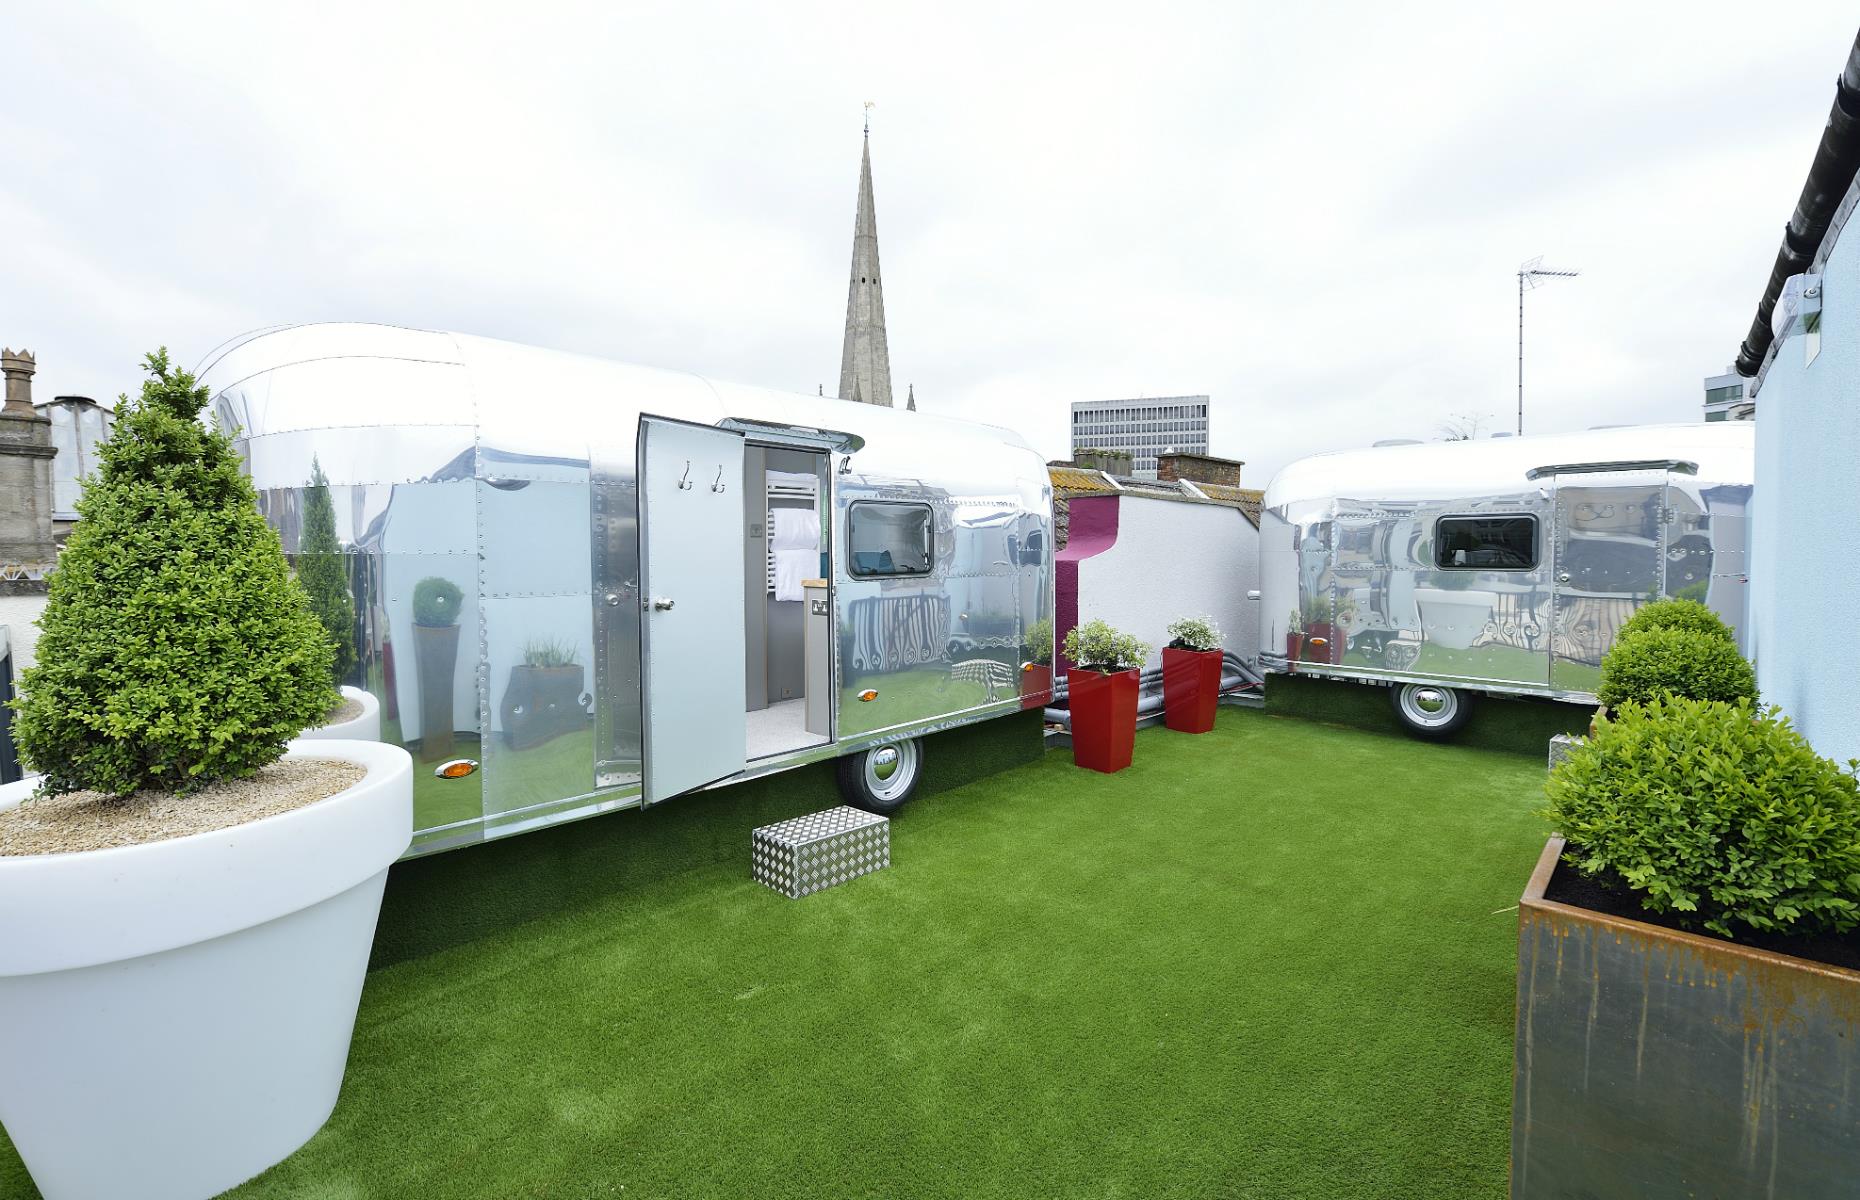 <p>Bristol is a trend-setting city and now you can stay in one of four vintage <a href="https://hostunusual.com/property/brooks-rooftop-rockets/">Airstream-style trailers</a> on the rooftop of a boutique hotel in the heart of the old town. While these particular trailers are British-made, they evoke the charm and nostalgia of their American counterparts with finesse.</p>